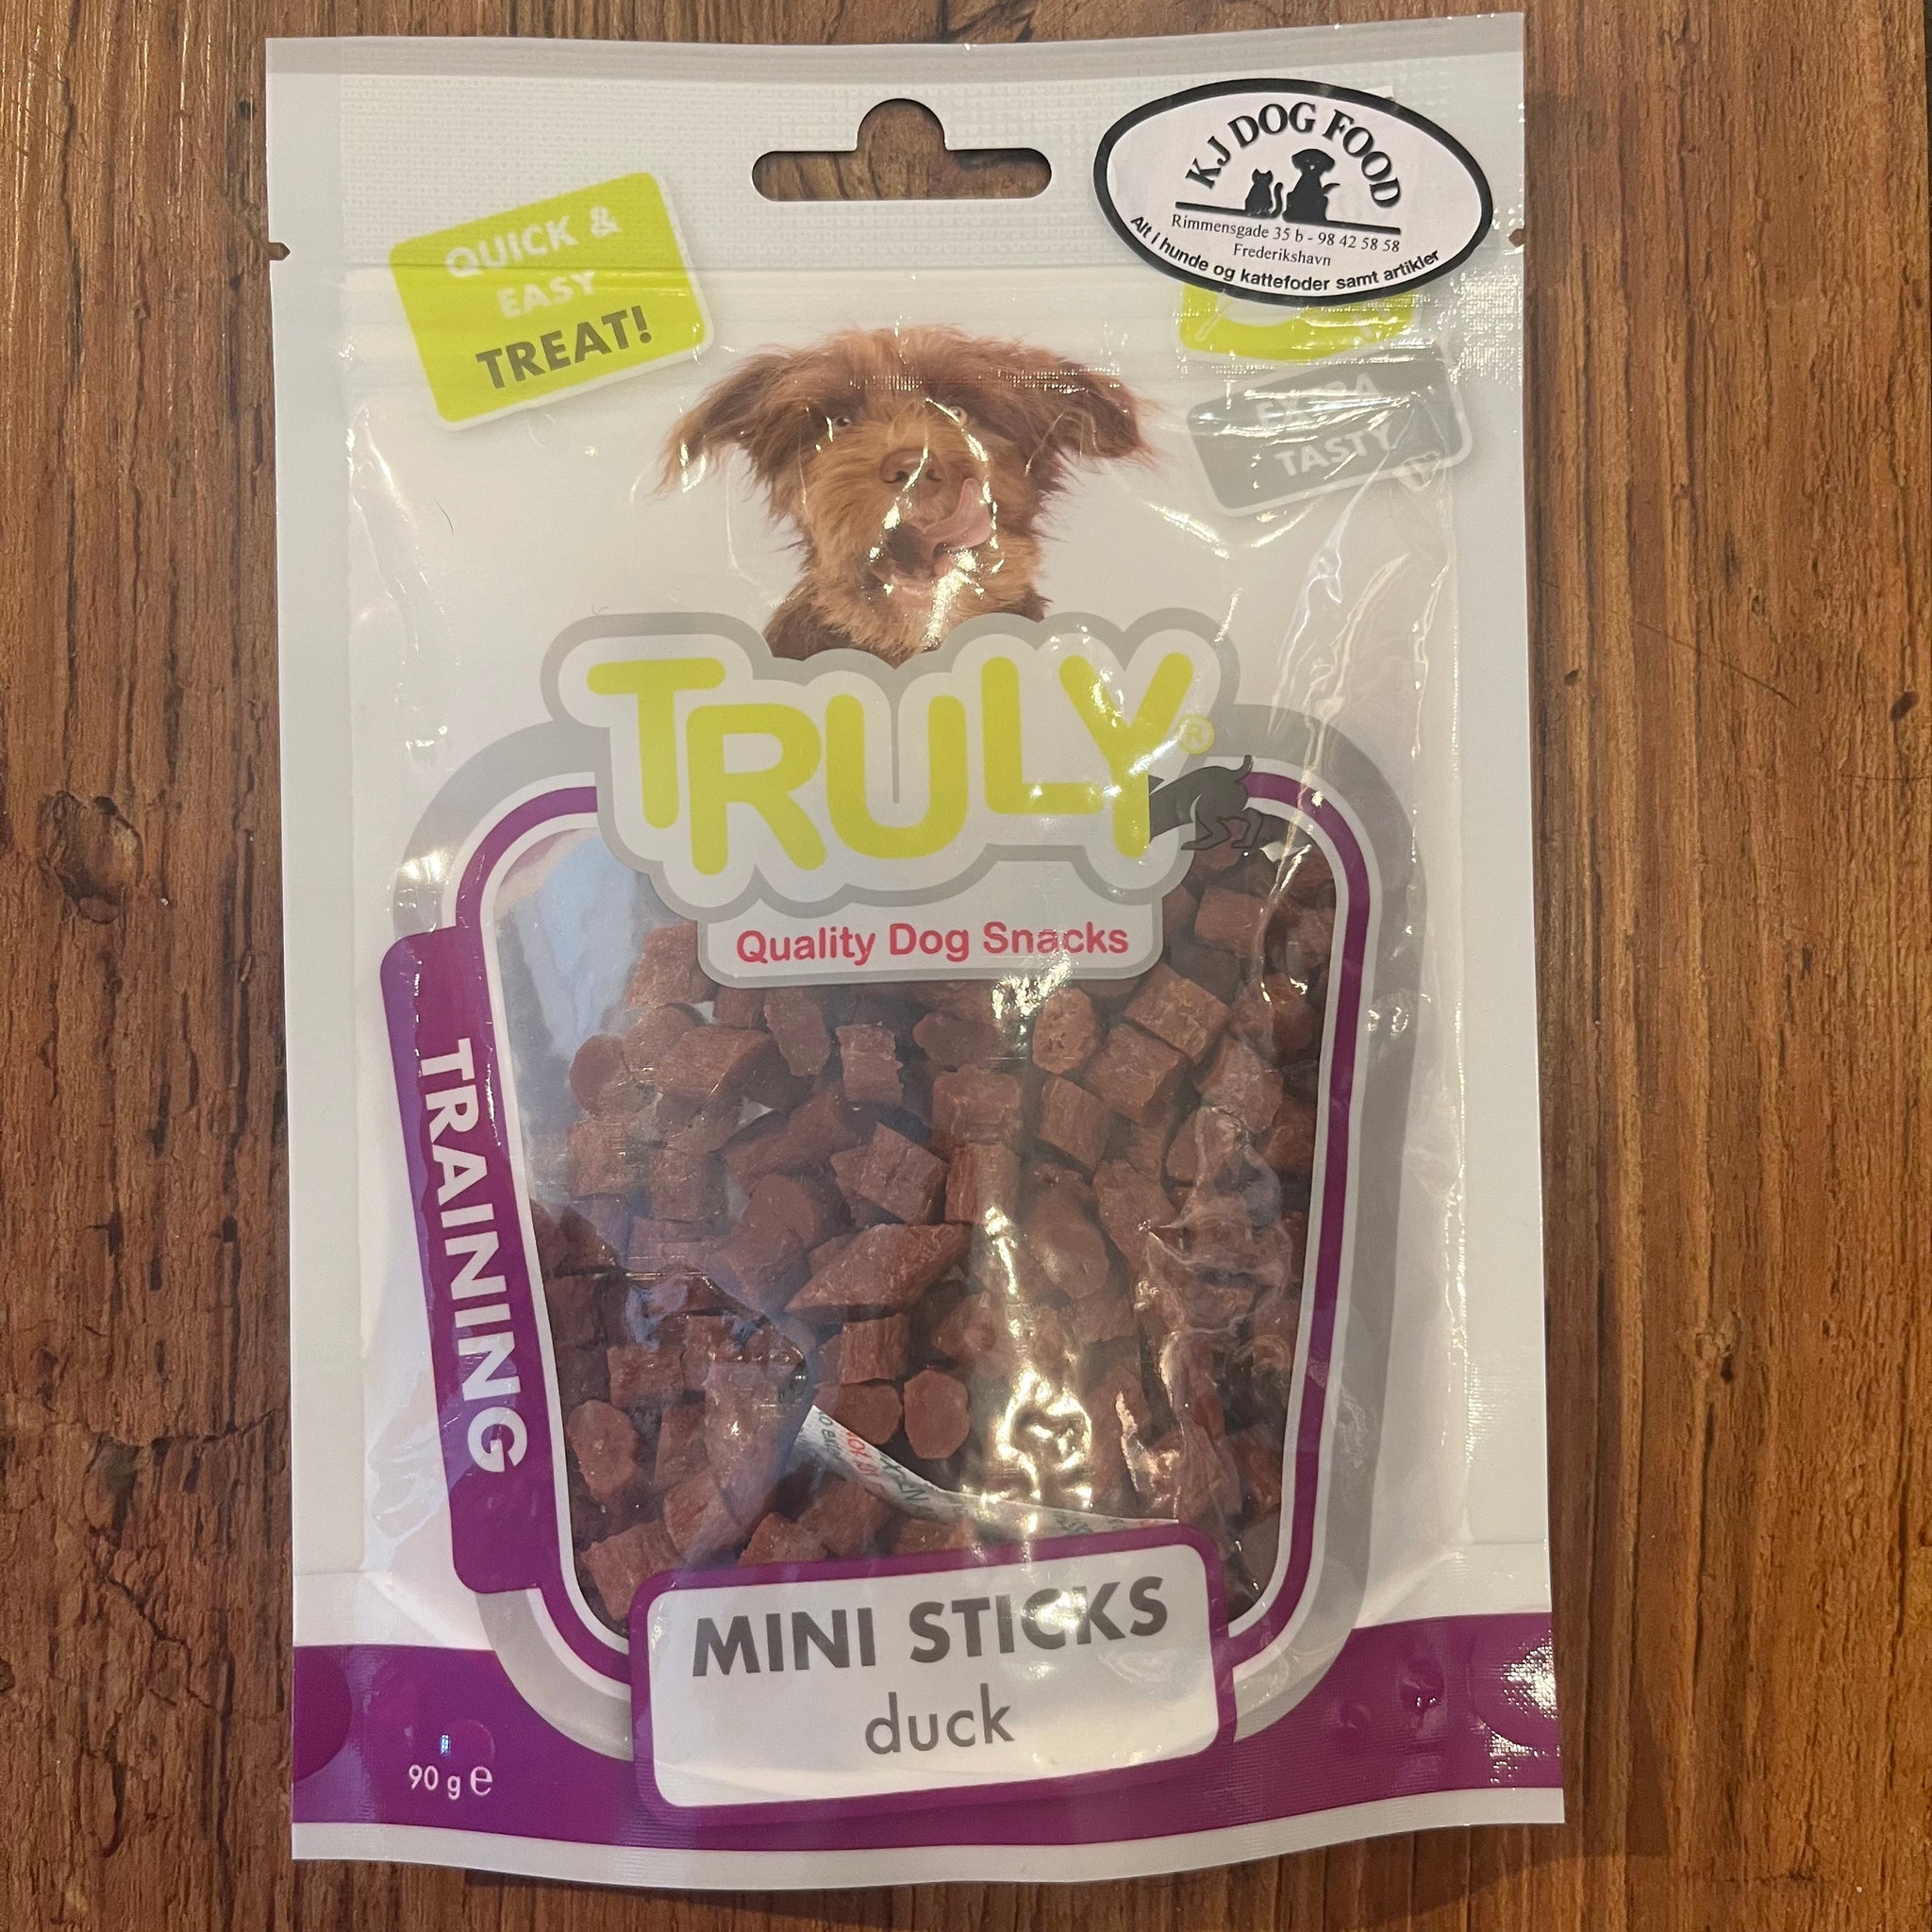 Truly mini sticks med and